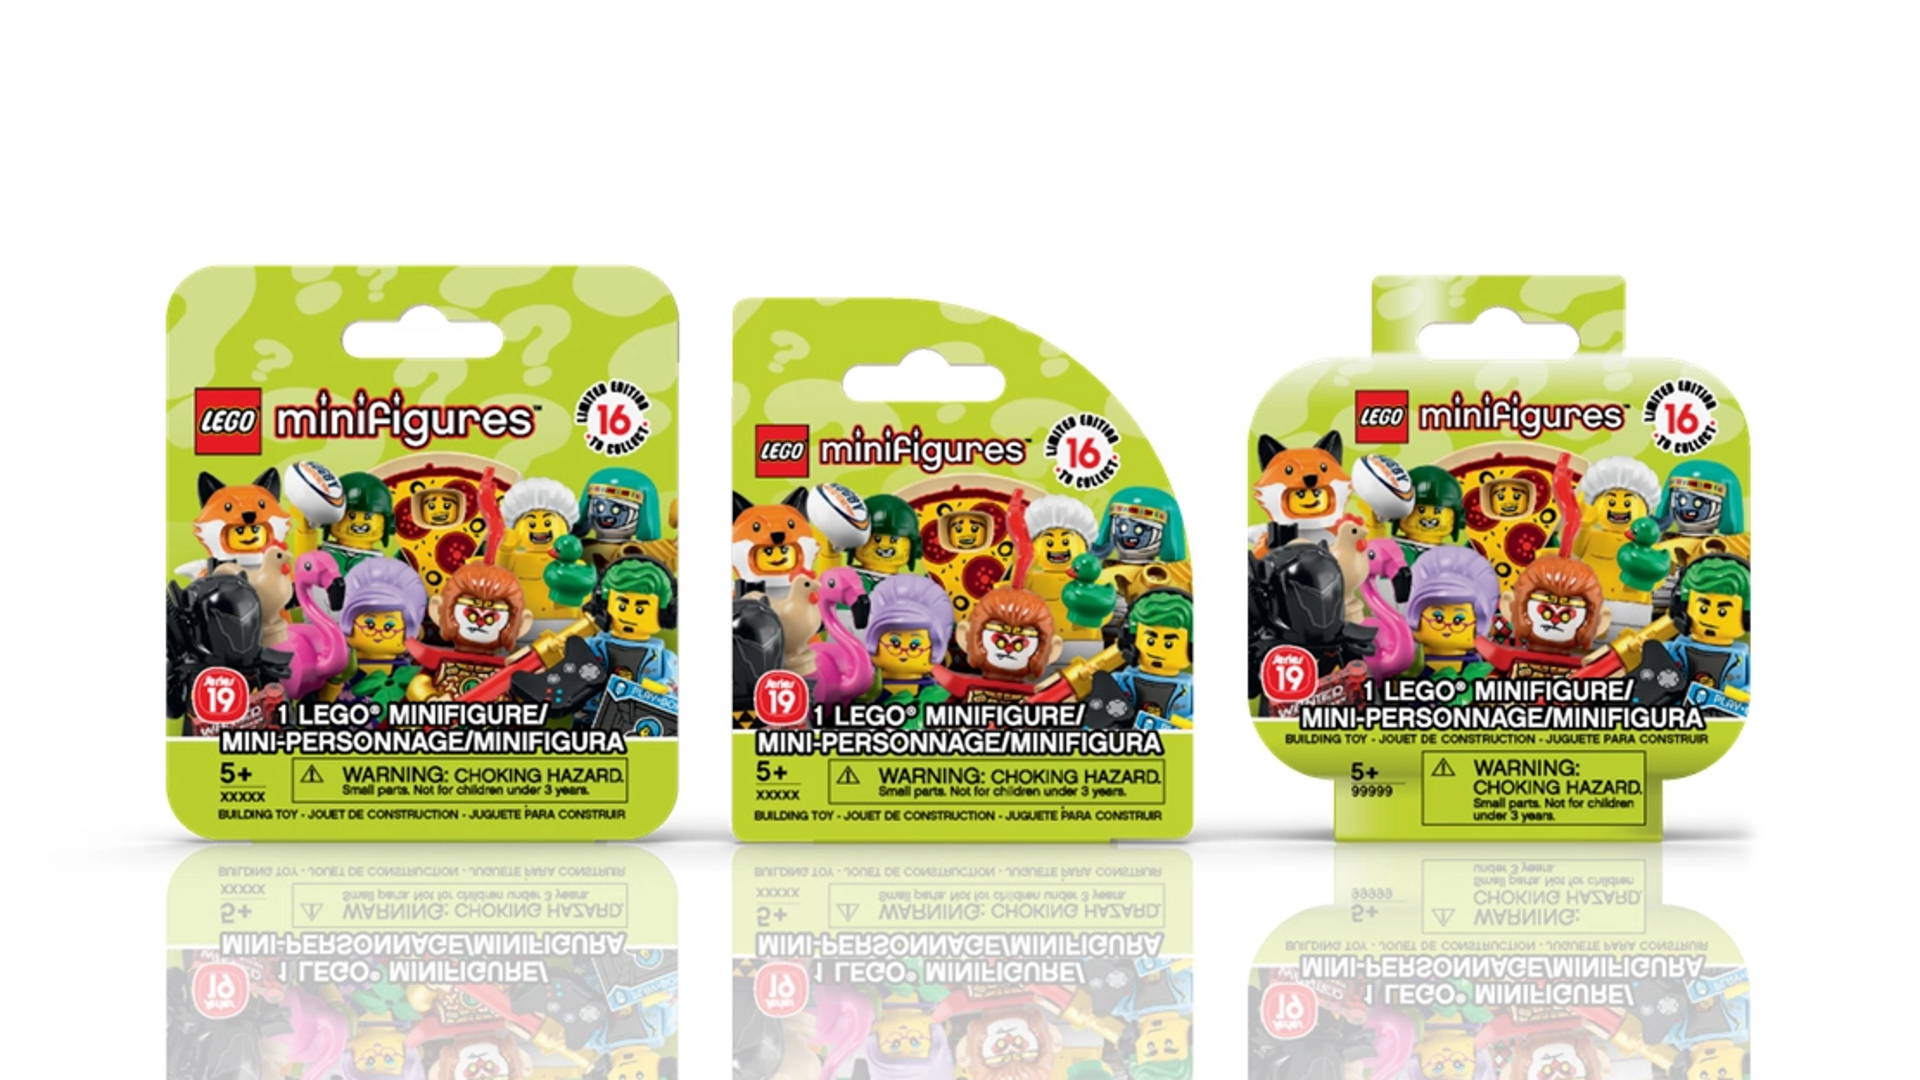 Featured image for Adult LEGO Collectors Cry Foul Over New Plastic-Free Packaging